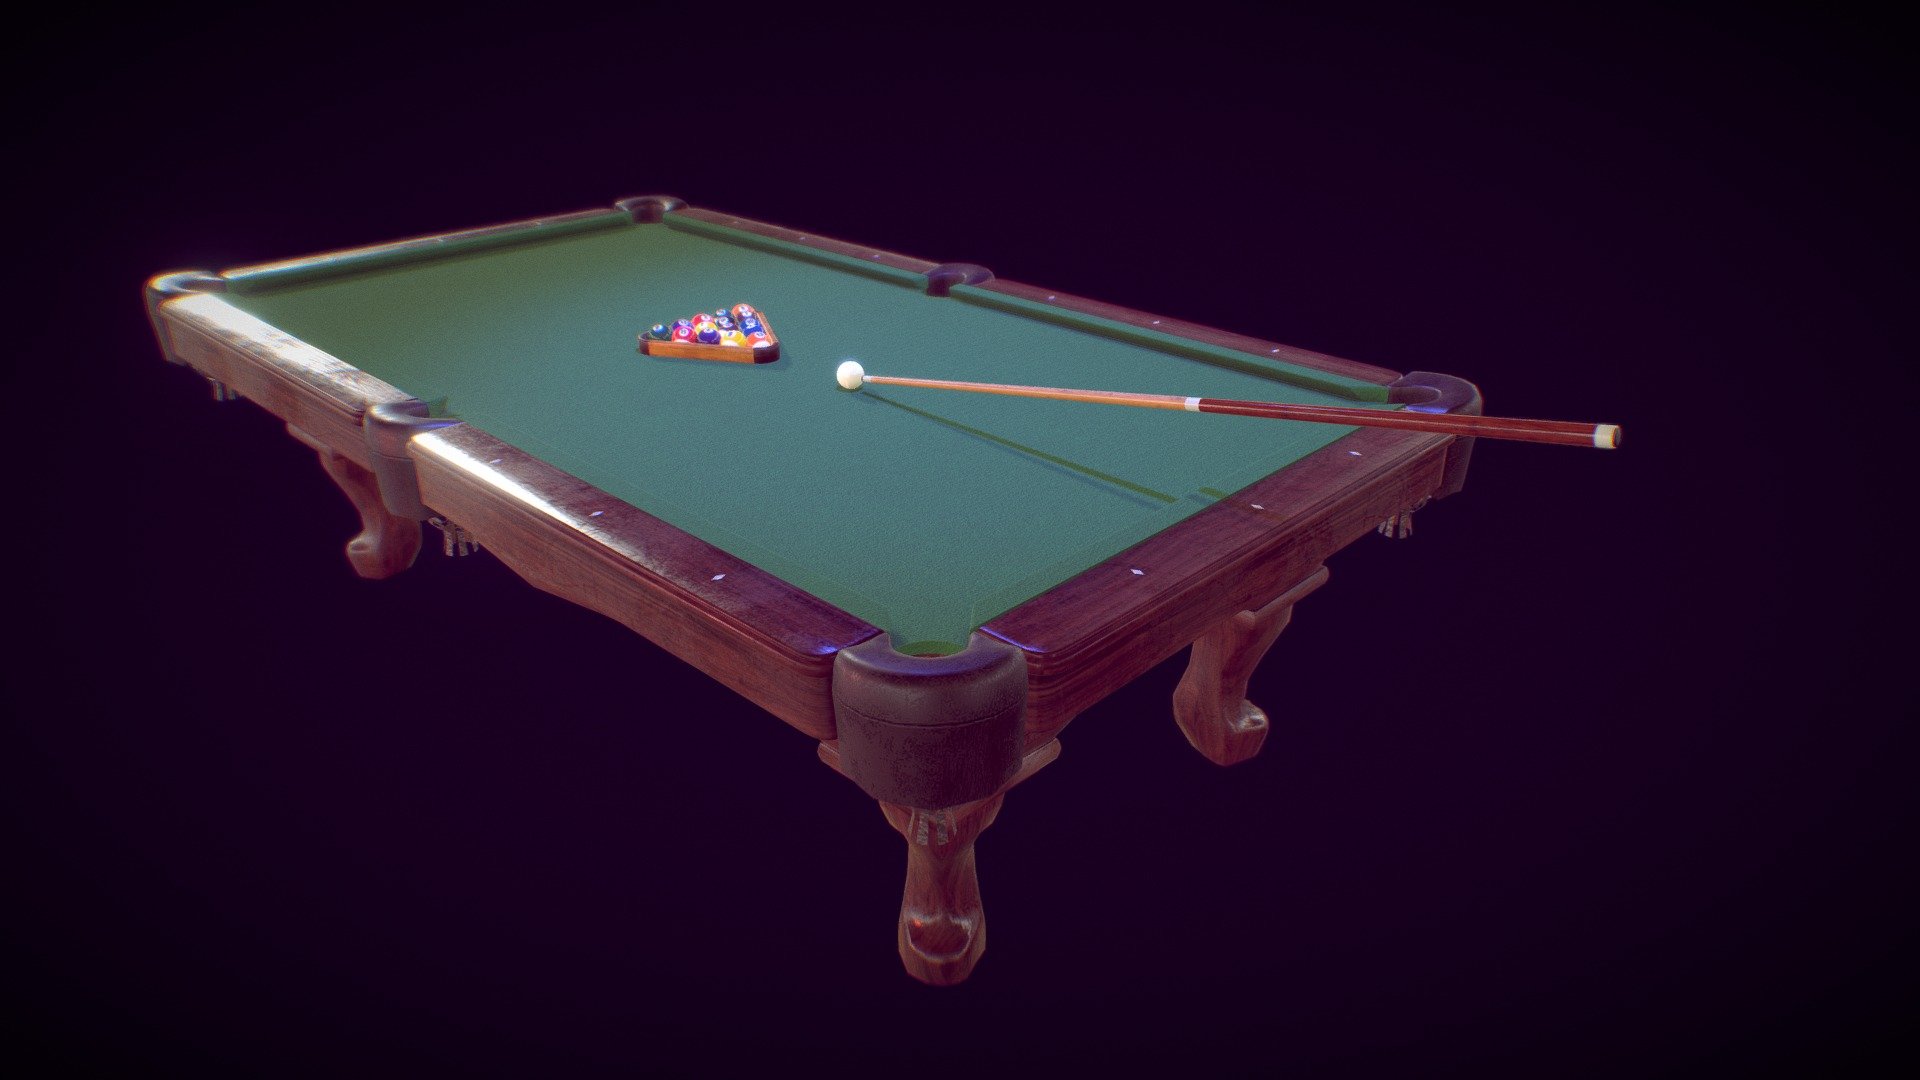 Billiard Game Kit is a high quality PBR game asset focusing on realism with great attention to details and scale.
This contains 2 PBR materials shared between meshes @2048x2048px(albedo, normal, specular/smoothness/glossiness, ao).
Meshes:
- billiard table
- 16 balls
- cue
- rack/triangle 3d model